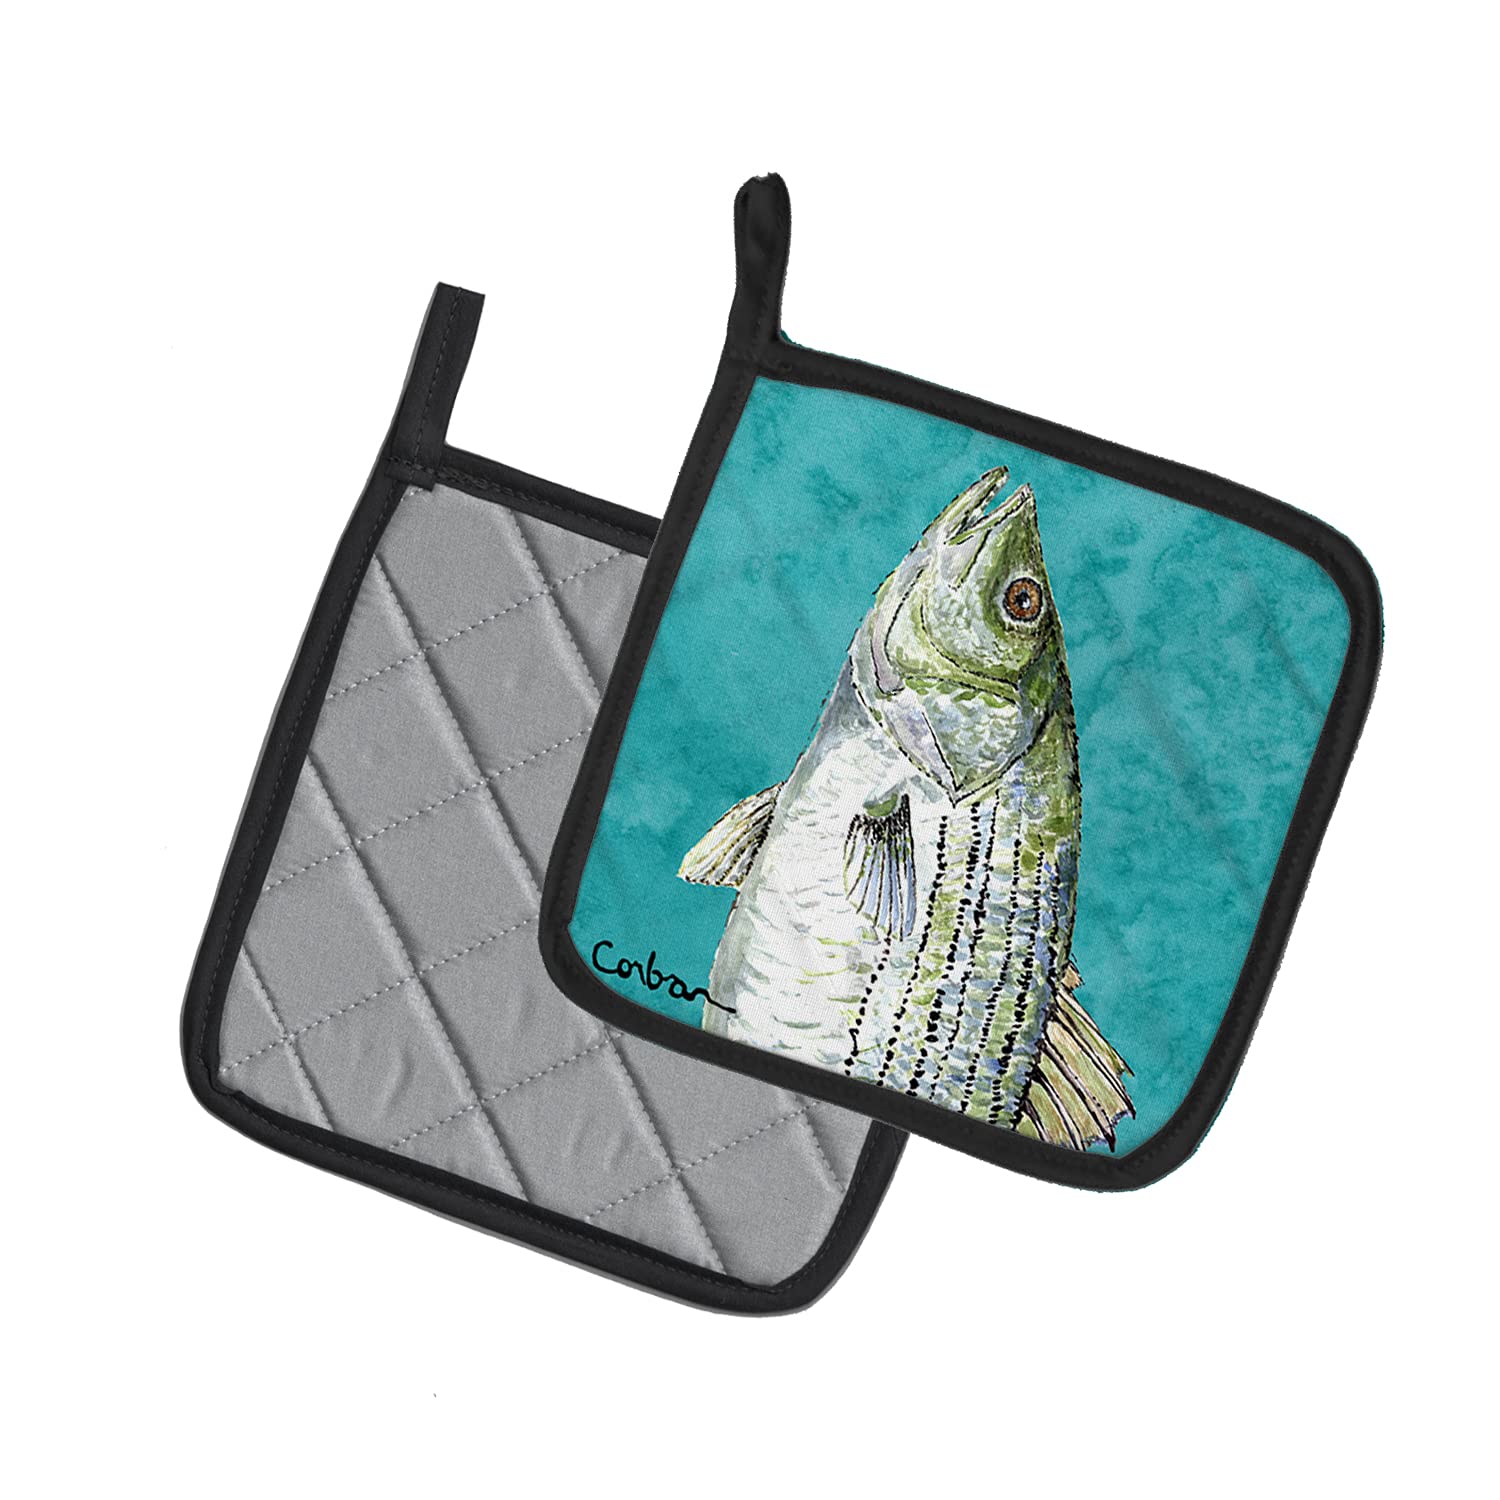 Caroline's Treasures 8720PTHD Striped Bass Fish Pair of Pot Holders Kitchen Heat Resistant Pot Holders Sets Oven Hot Pads for Cooking Baking BBQ, 7 1/2 x 7 1/2